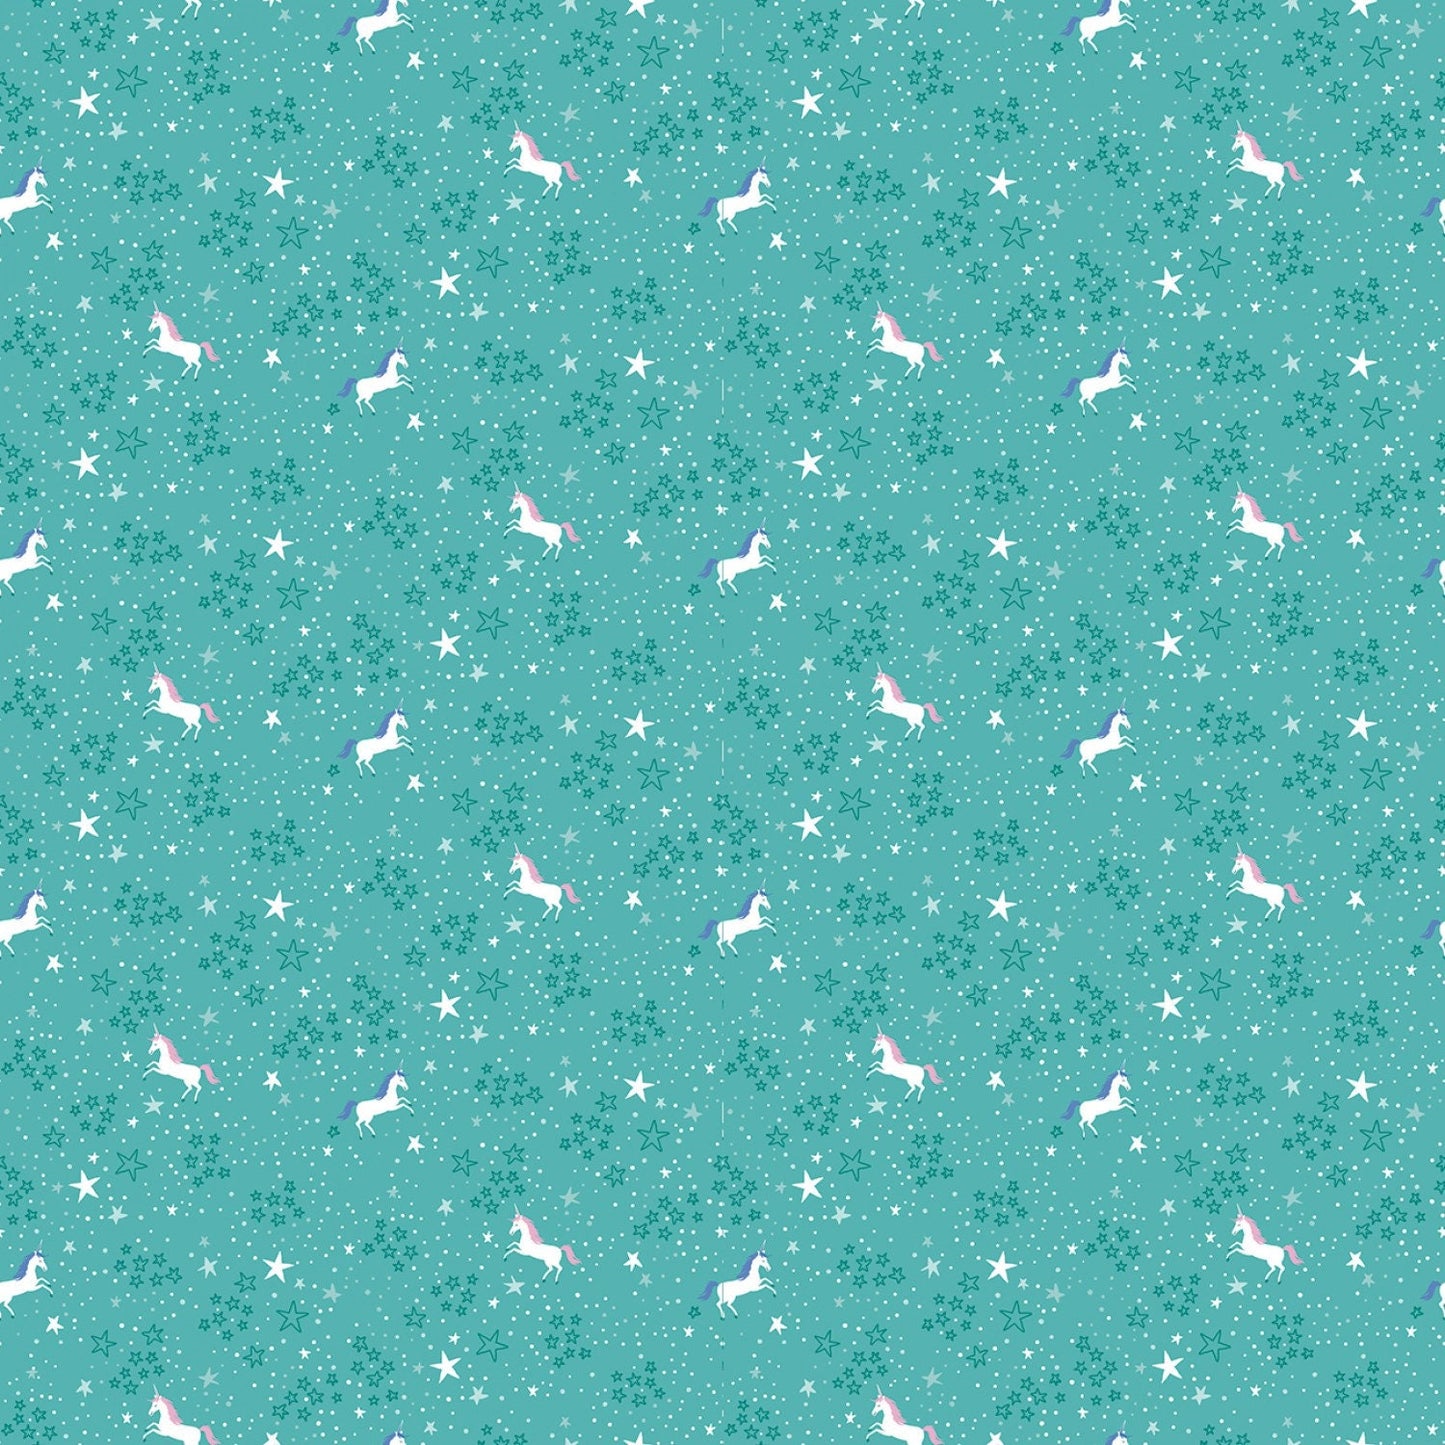 Last Piece 1 yard 34 inches My Unicorn by Kelly Panacci Starry Night Teal  C8204R-TEAL Cotton Woven Fabric